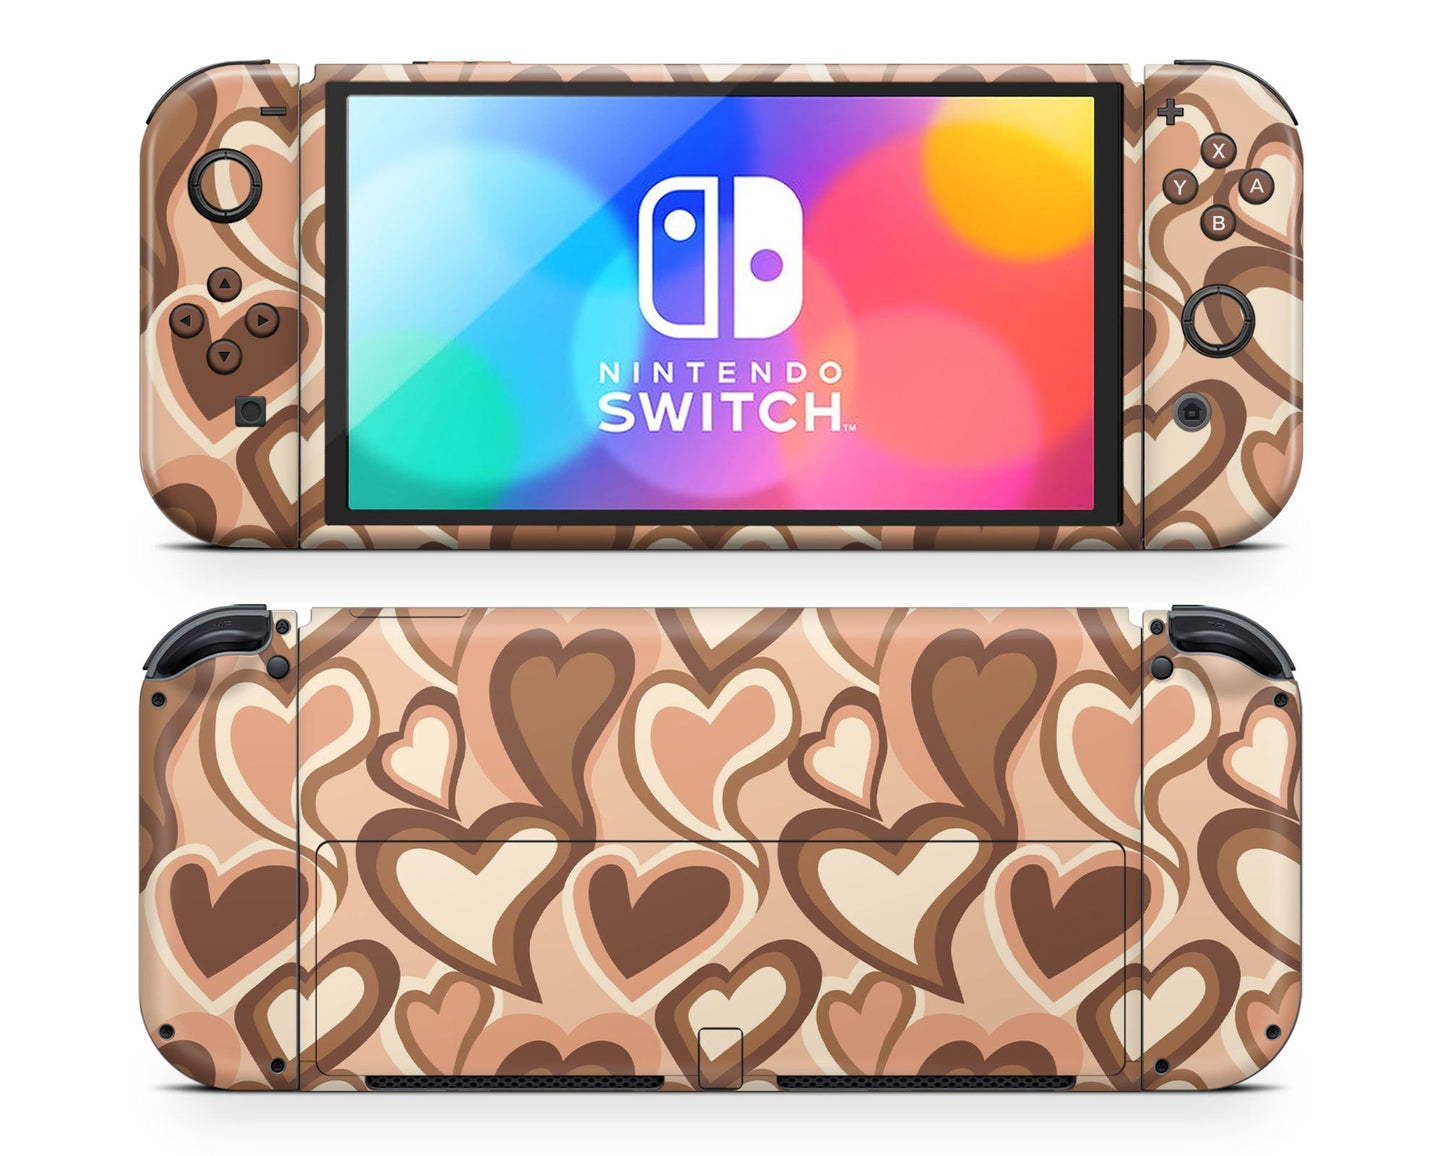 Lux Skins Nintendo Switch OLED Latte Drip Hearts Full Set Skins - Pattern Abstract Skin